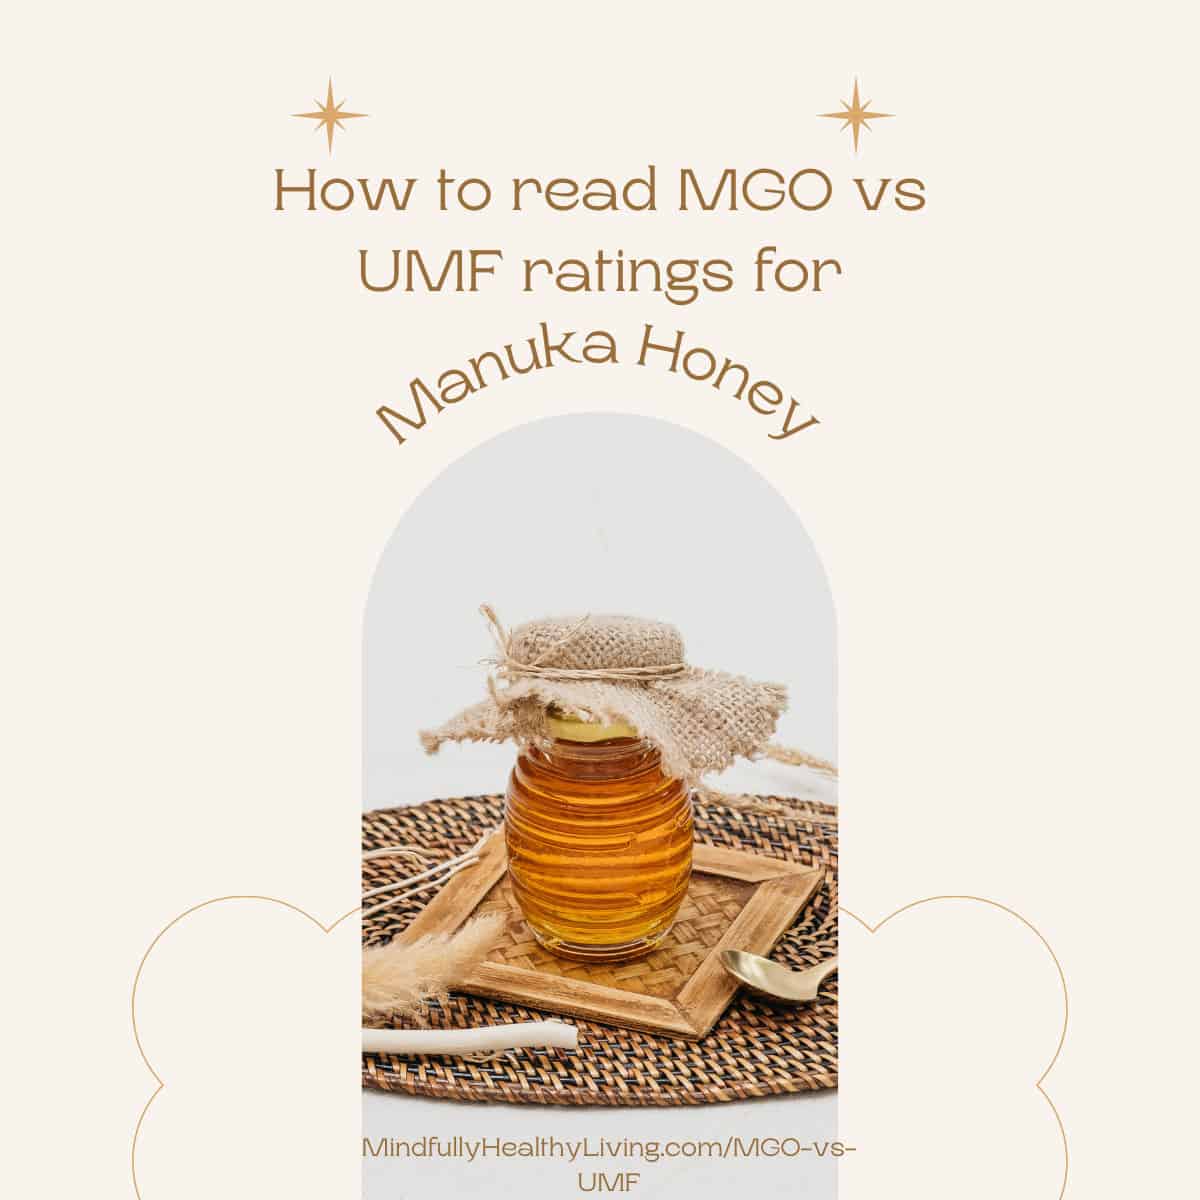 a light grey doorshaped grey outline on a cream background with a circular wooden woven placemat and a square wooden coaster with an oval jar of honey on top of it covered with a mesh burlap tied for a lip with a spoon in the left corner. above it reads How to read MGO vs UMF ratings for Manuka Honey. At the bottom it reads MindfullyHealthyLiving.com/MGO-vs-UMF